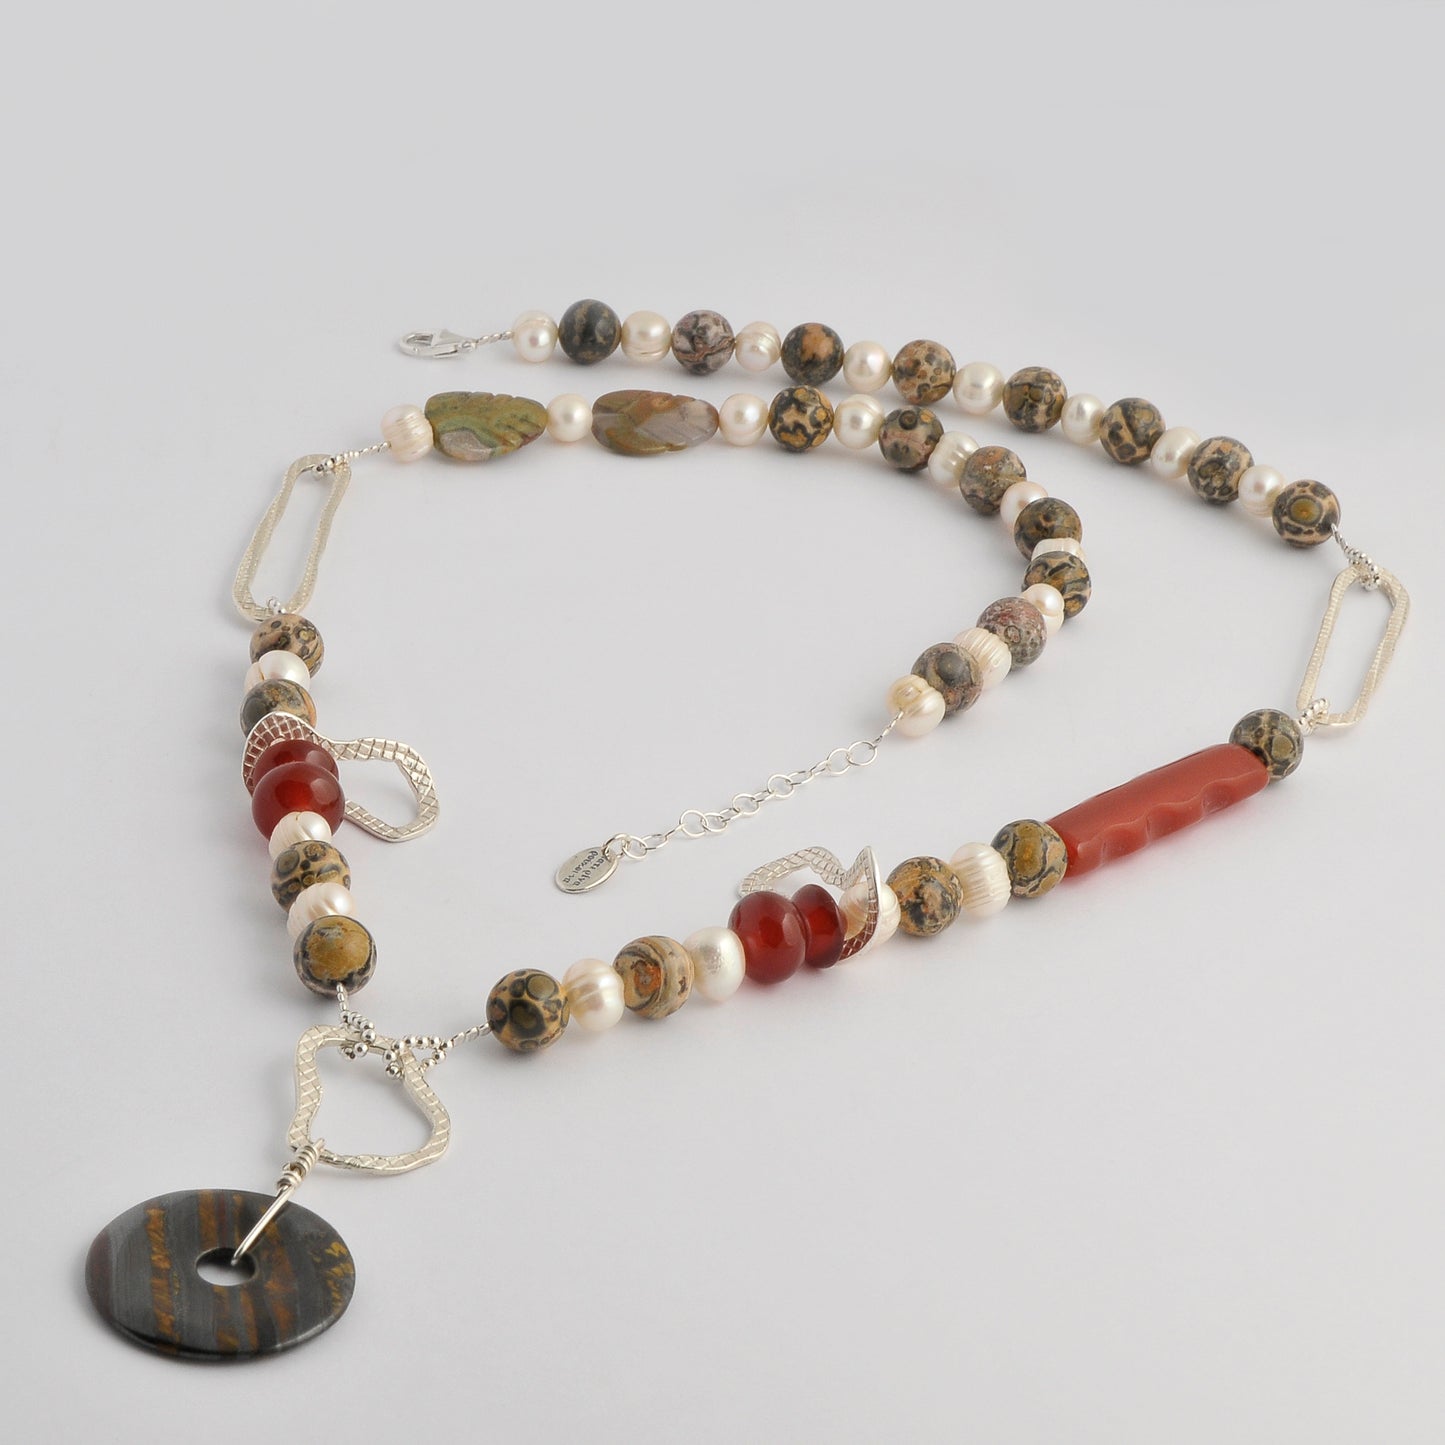 Hematite, jade,cornelians and pearls with silver necklace